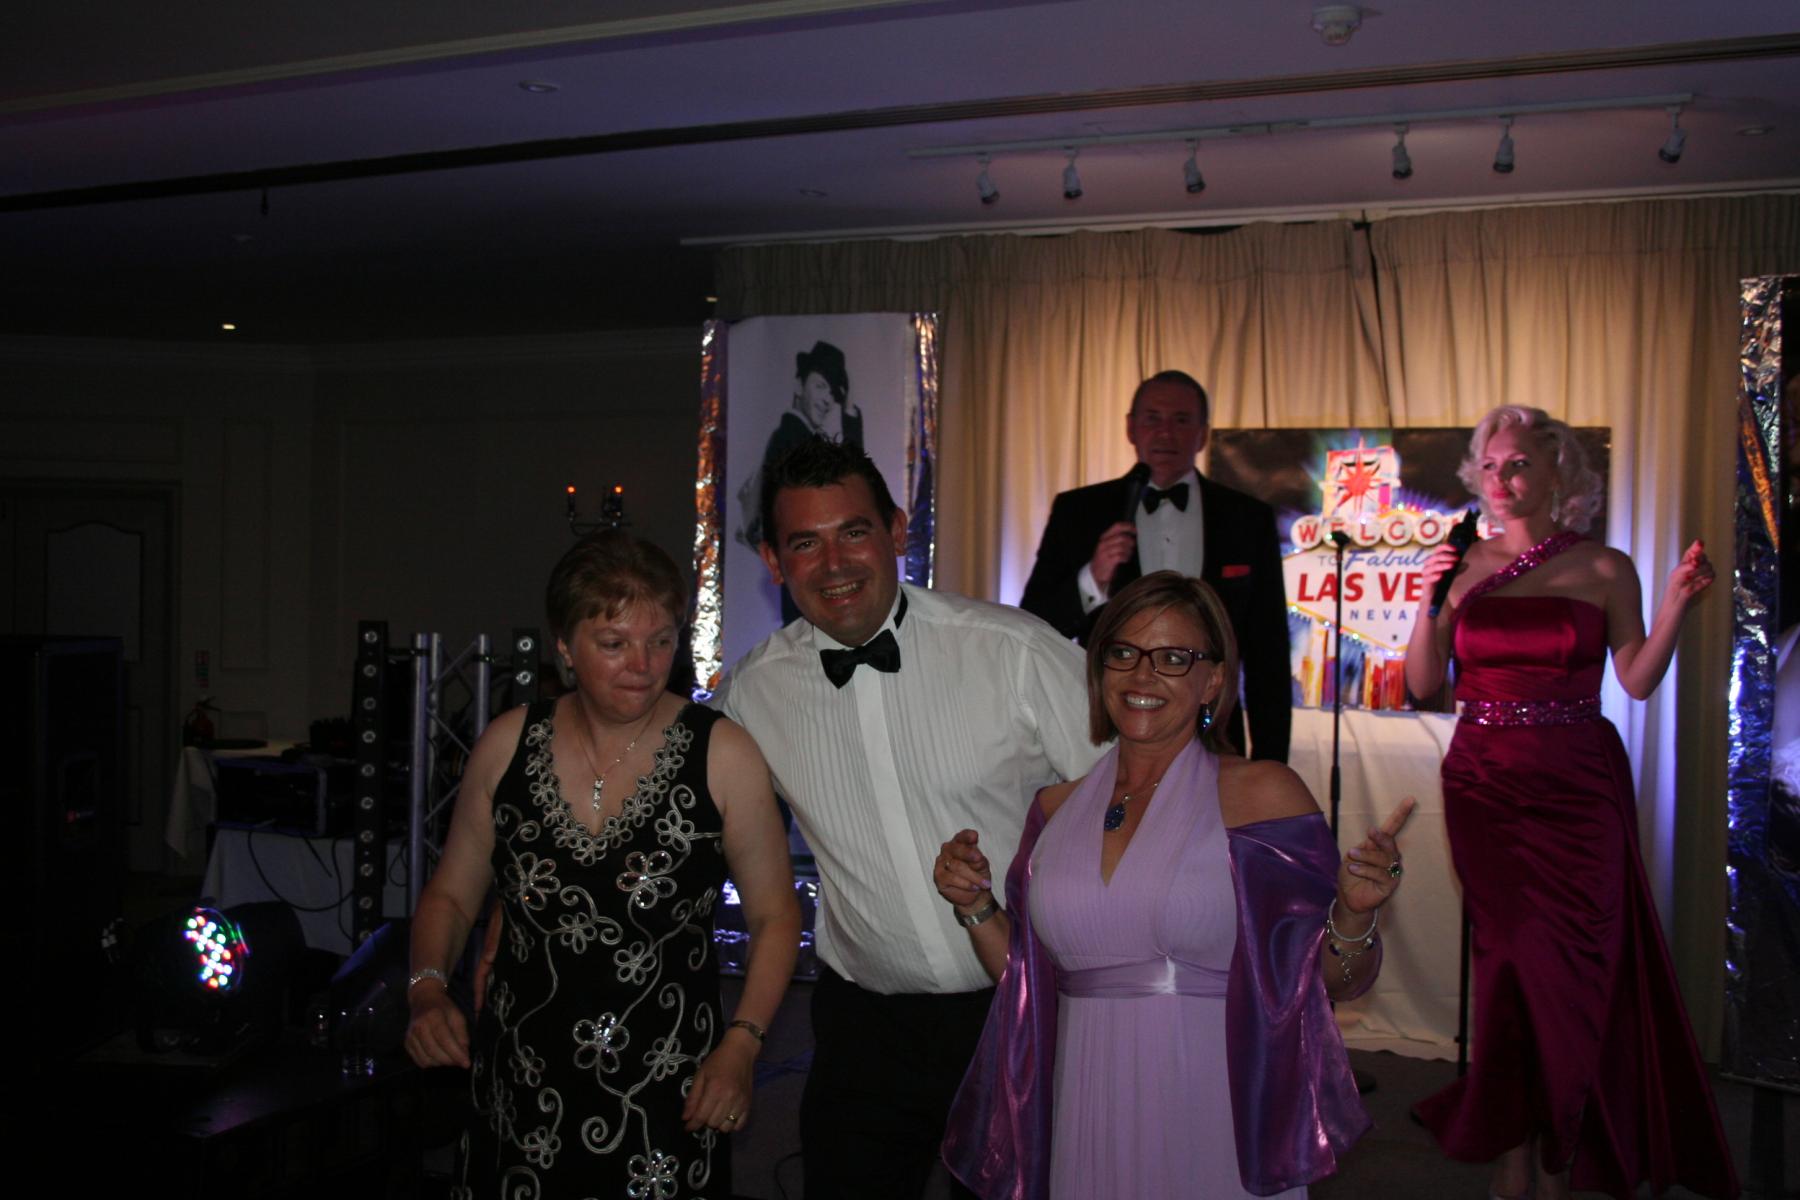 An amazing Monroe & Sinatra night at St Pierre Park Hotel thanks to Sidney's Sponsored Events GSPCA & Guernsey Cheshire Home August 2015